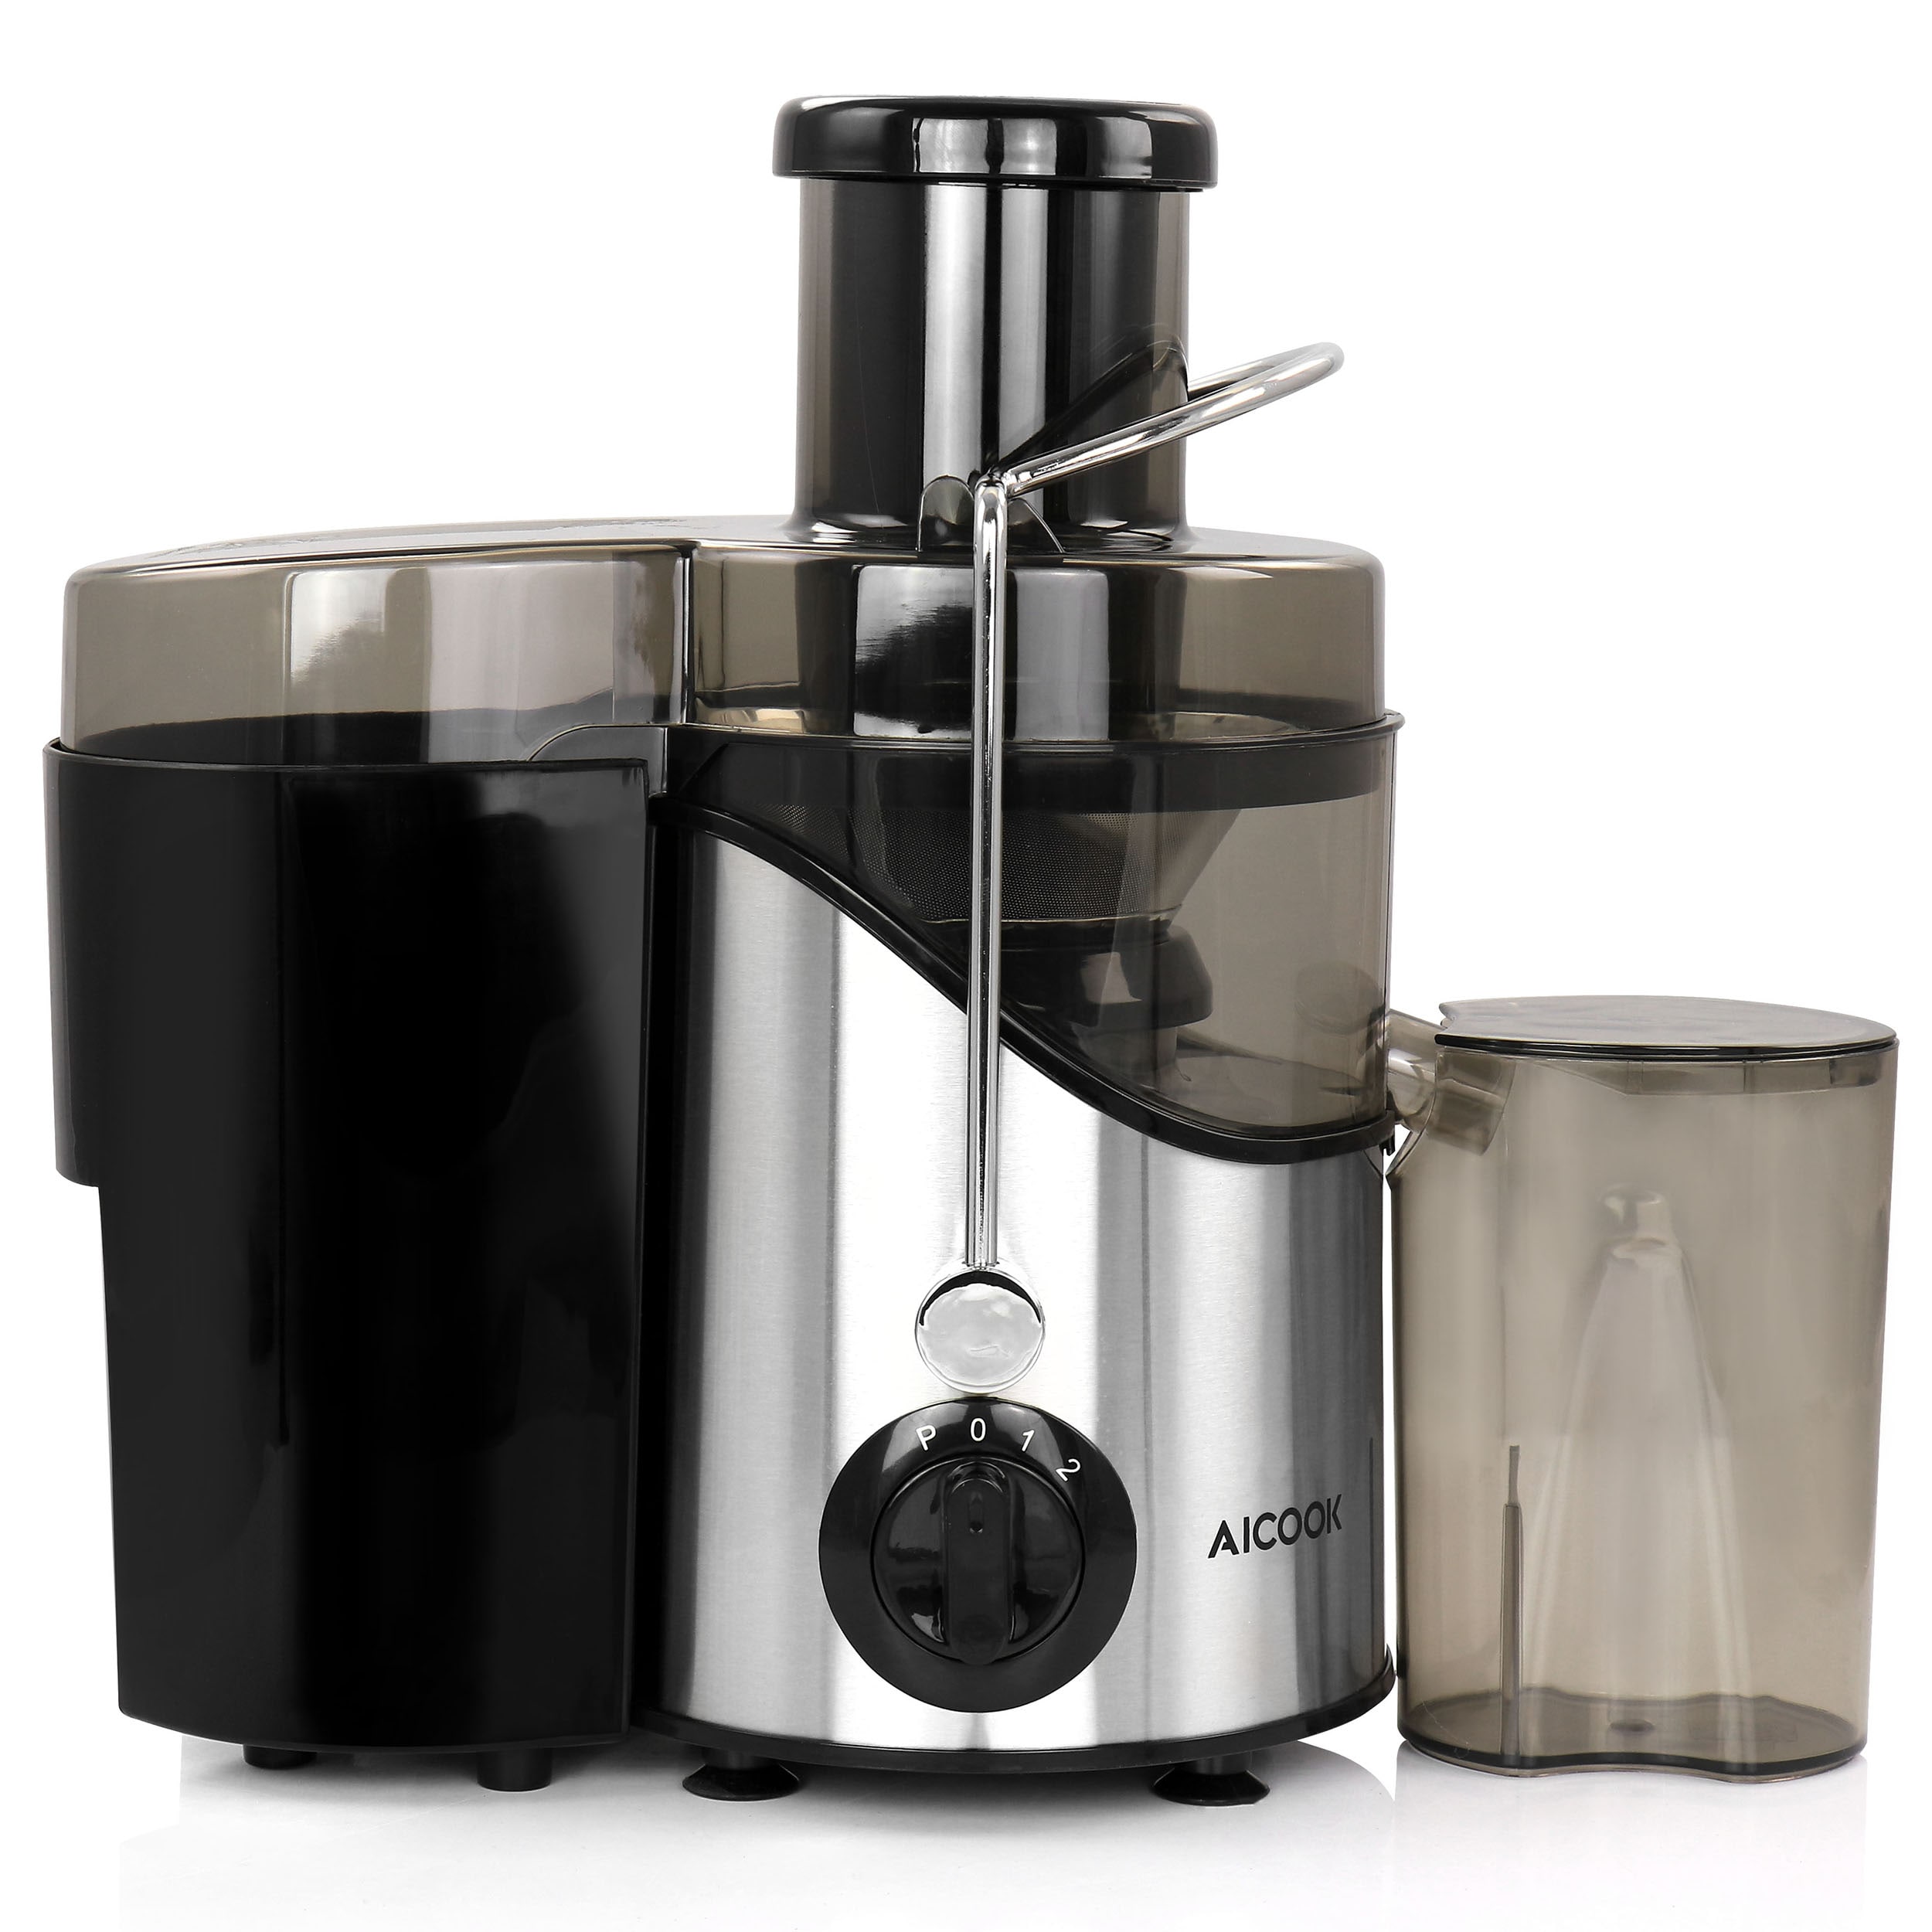 mandat Anvendelig Sanselig Aicook 13.6-oz Silver Juice Extracter in the Juicers department at Lowes.com